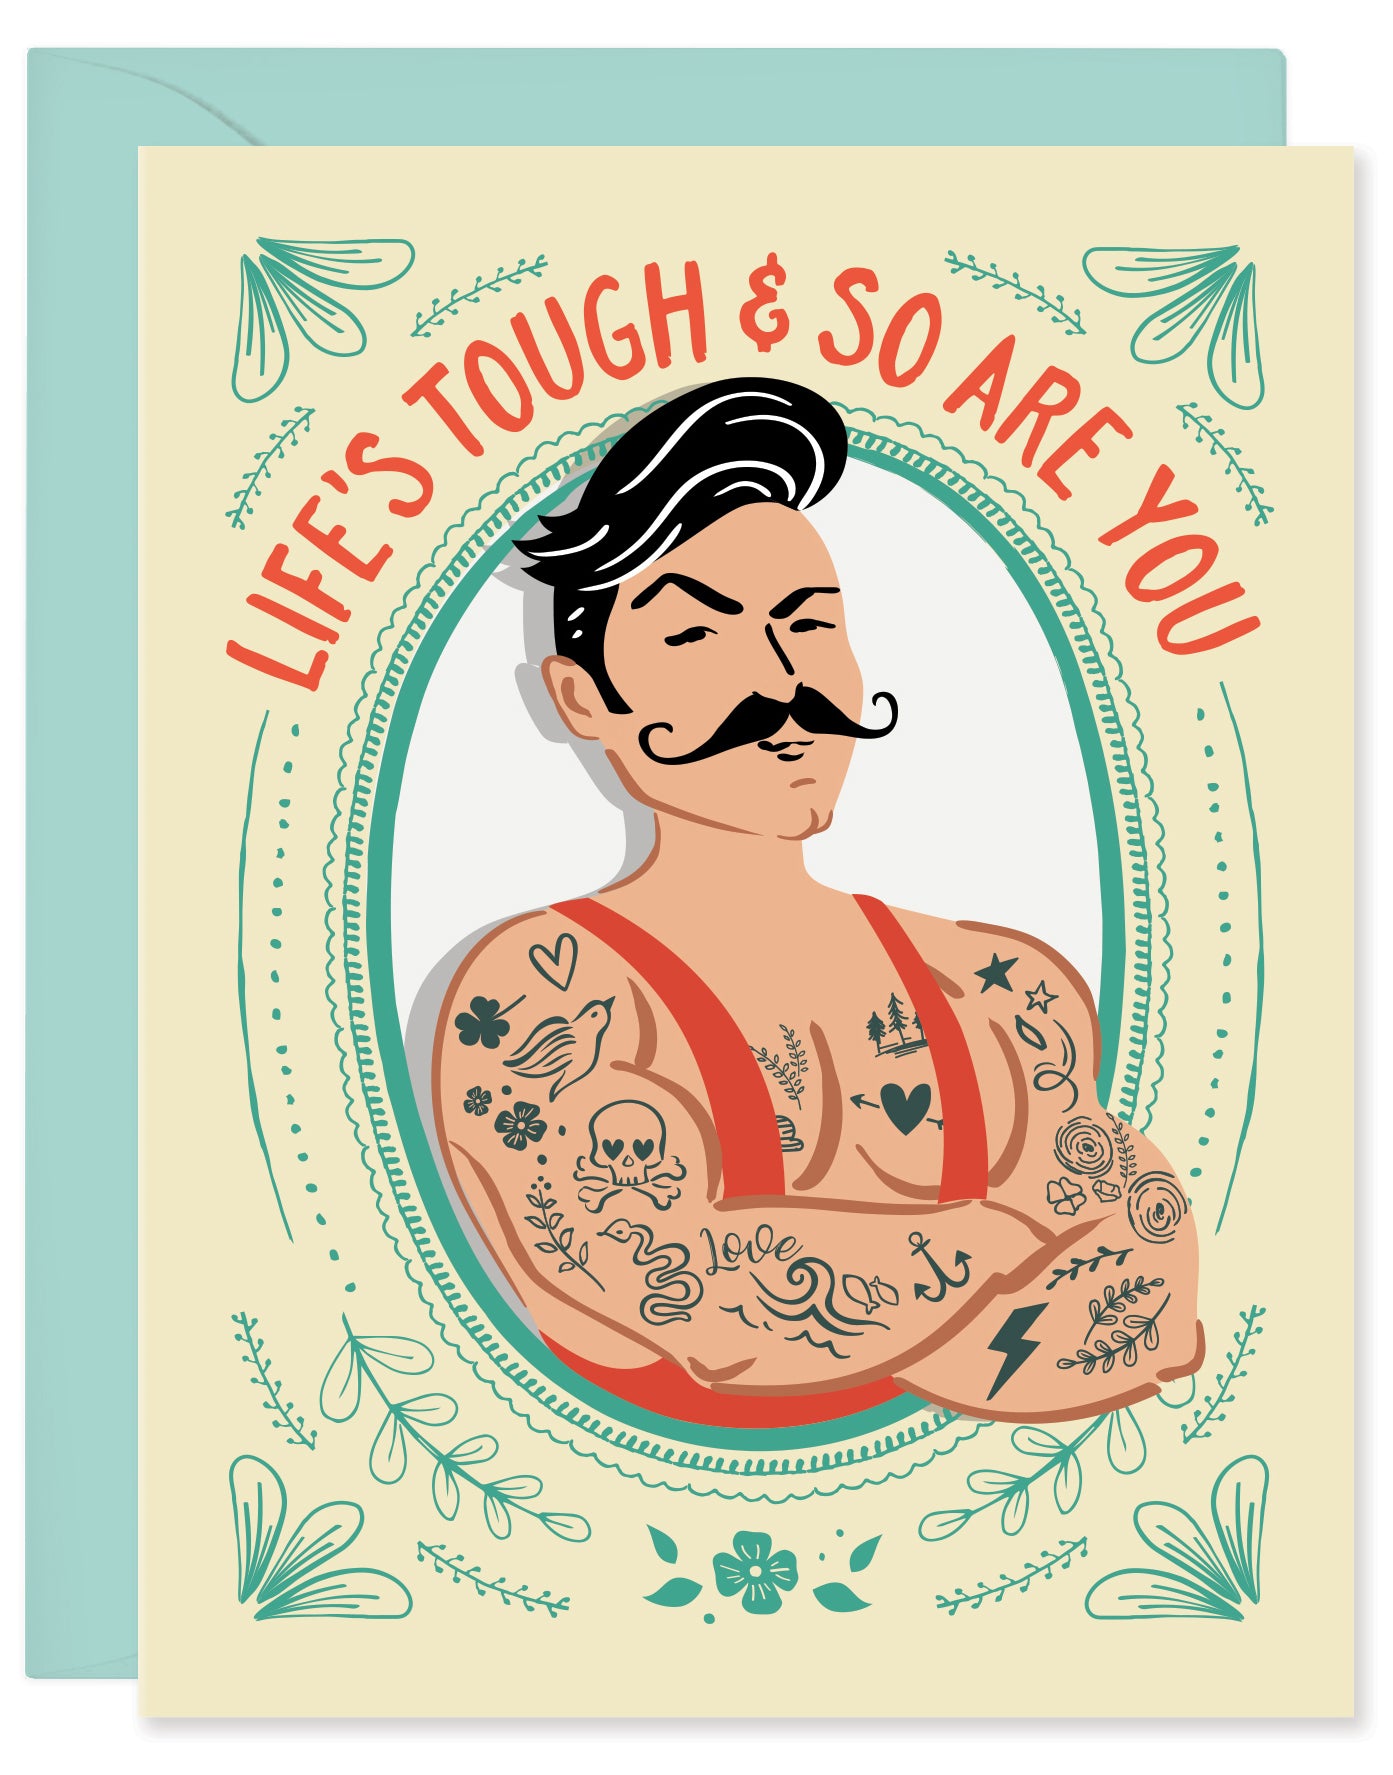 LIFE IS TOUGH & SO ARE YOU CARD